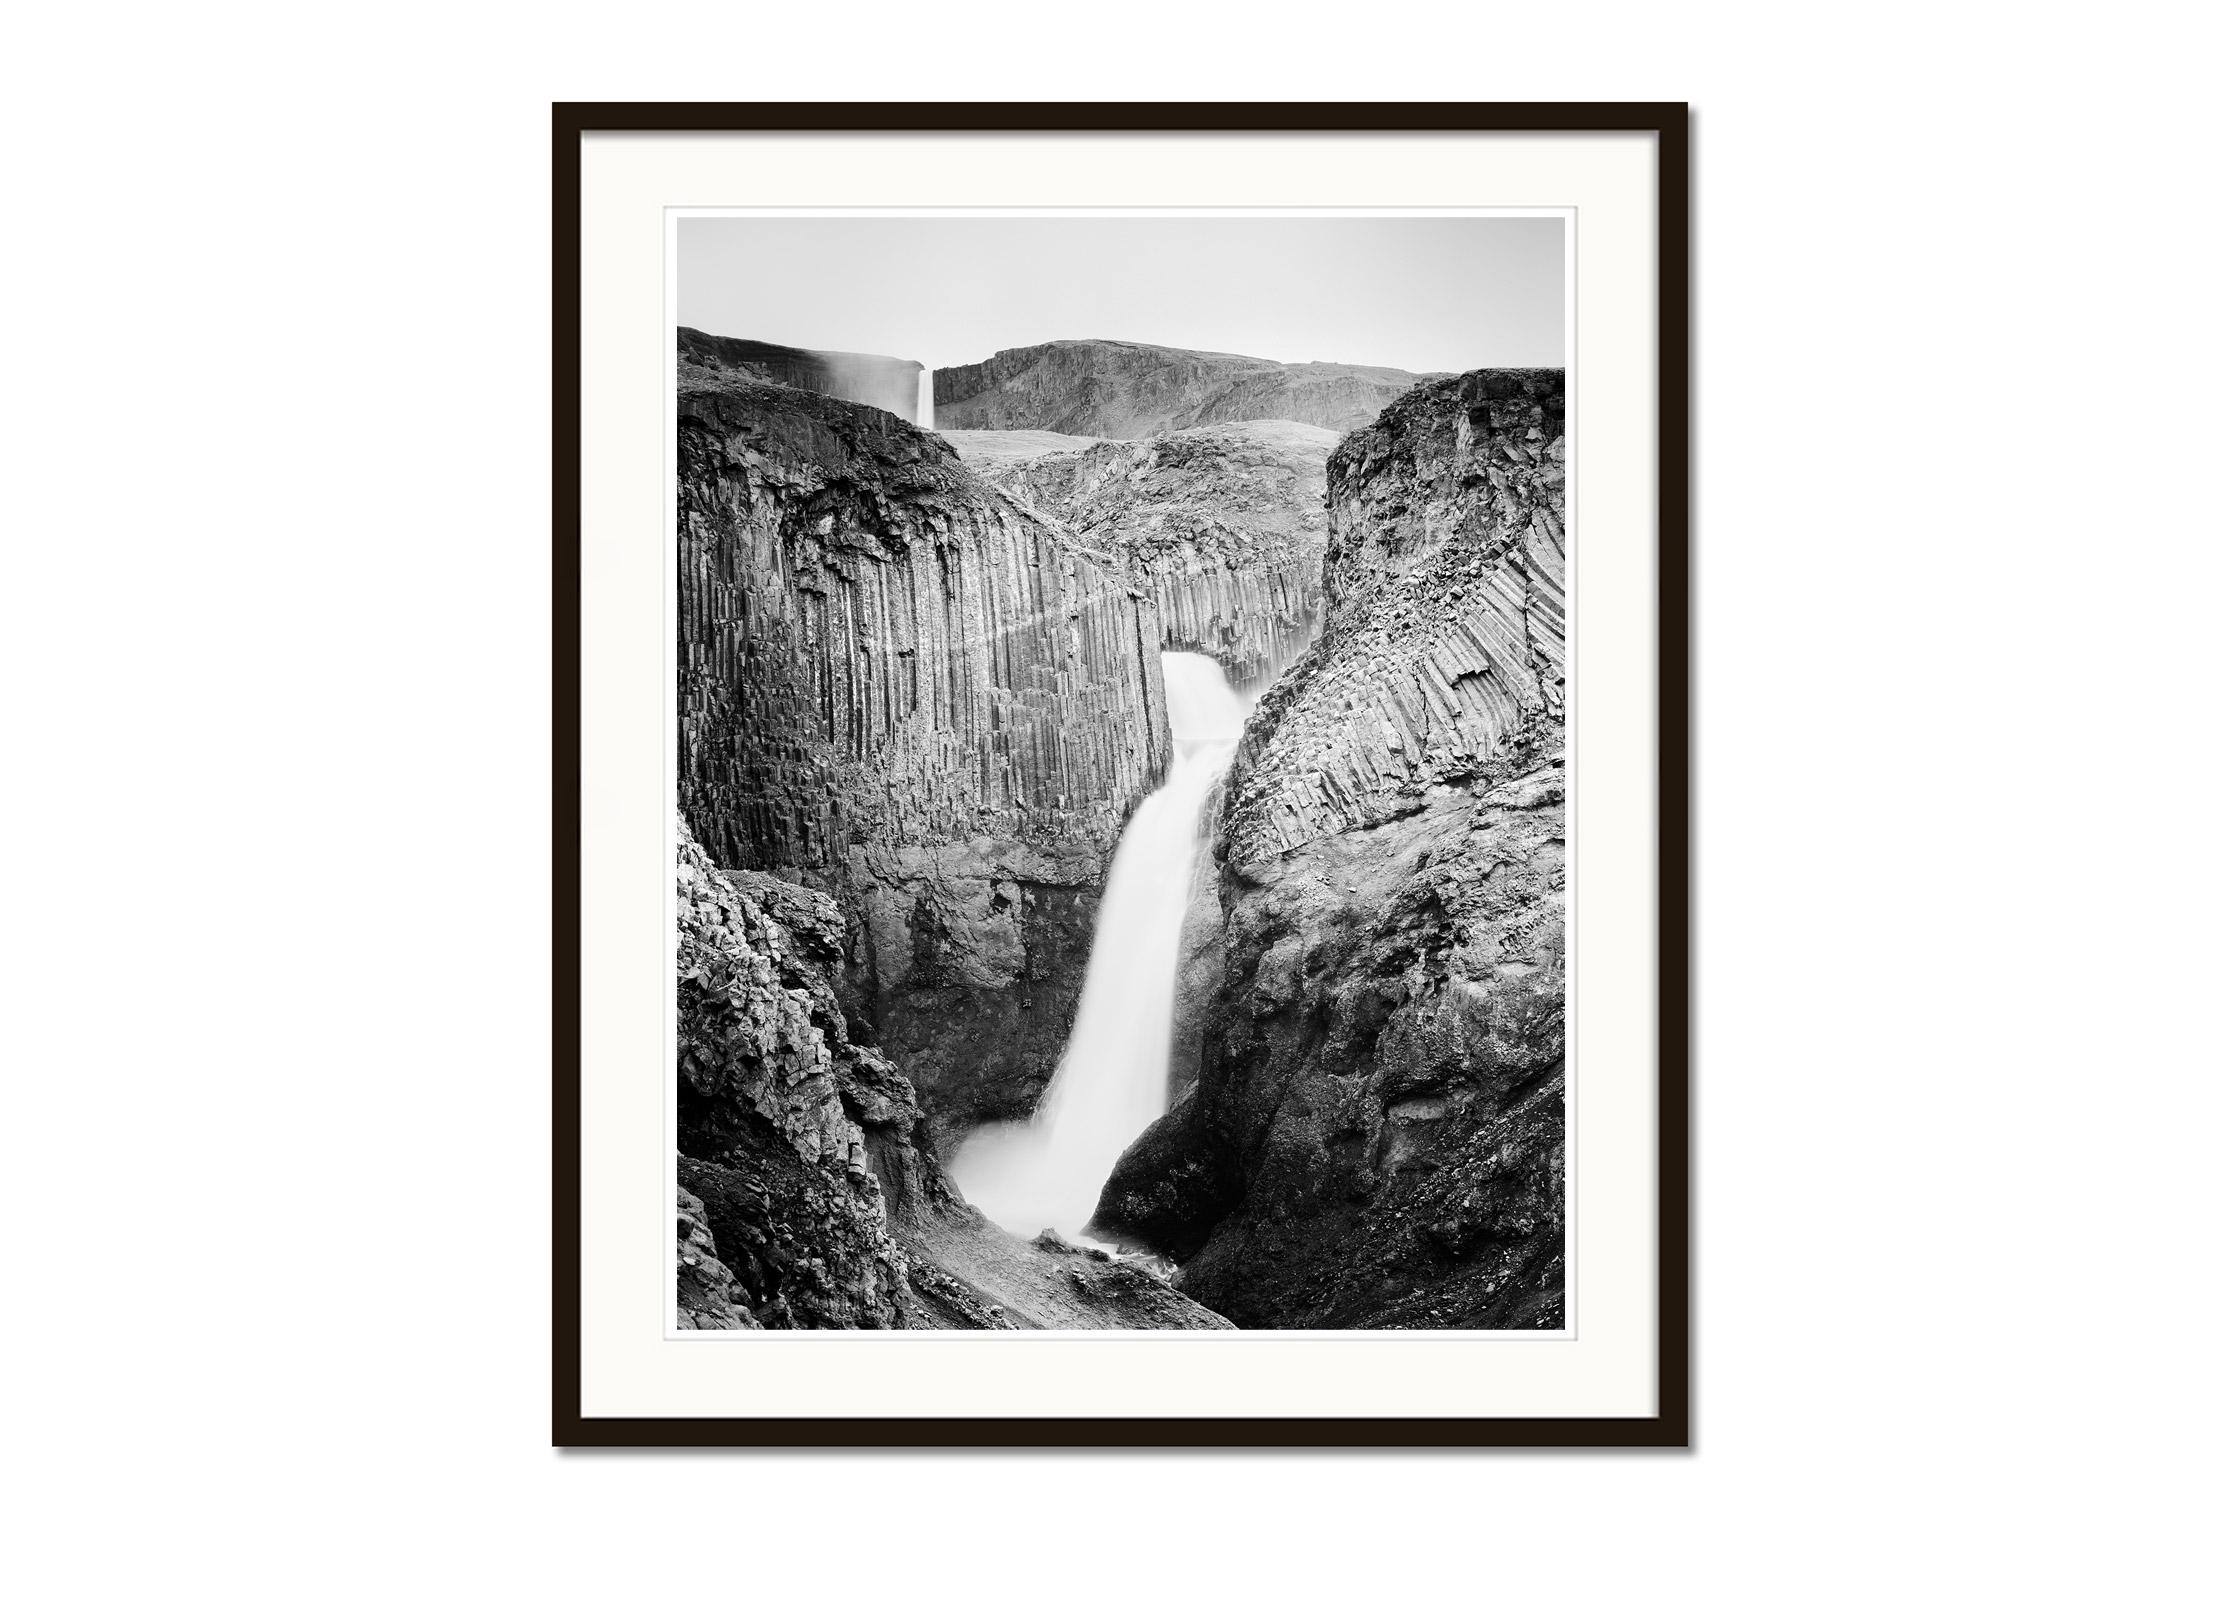 Hengifoss, Waterfall, Iceland, black and white fine art photography, landscape - Gray Black and White Photograph by Gerald Berghammer, Ina Forstinger